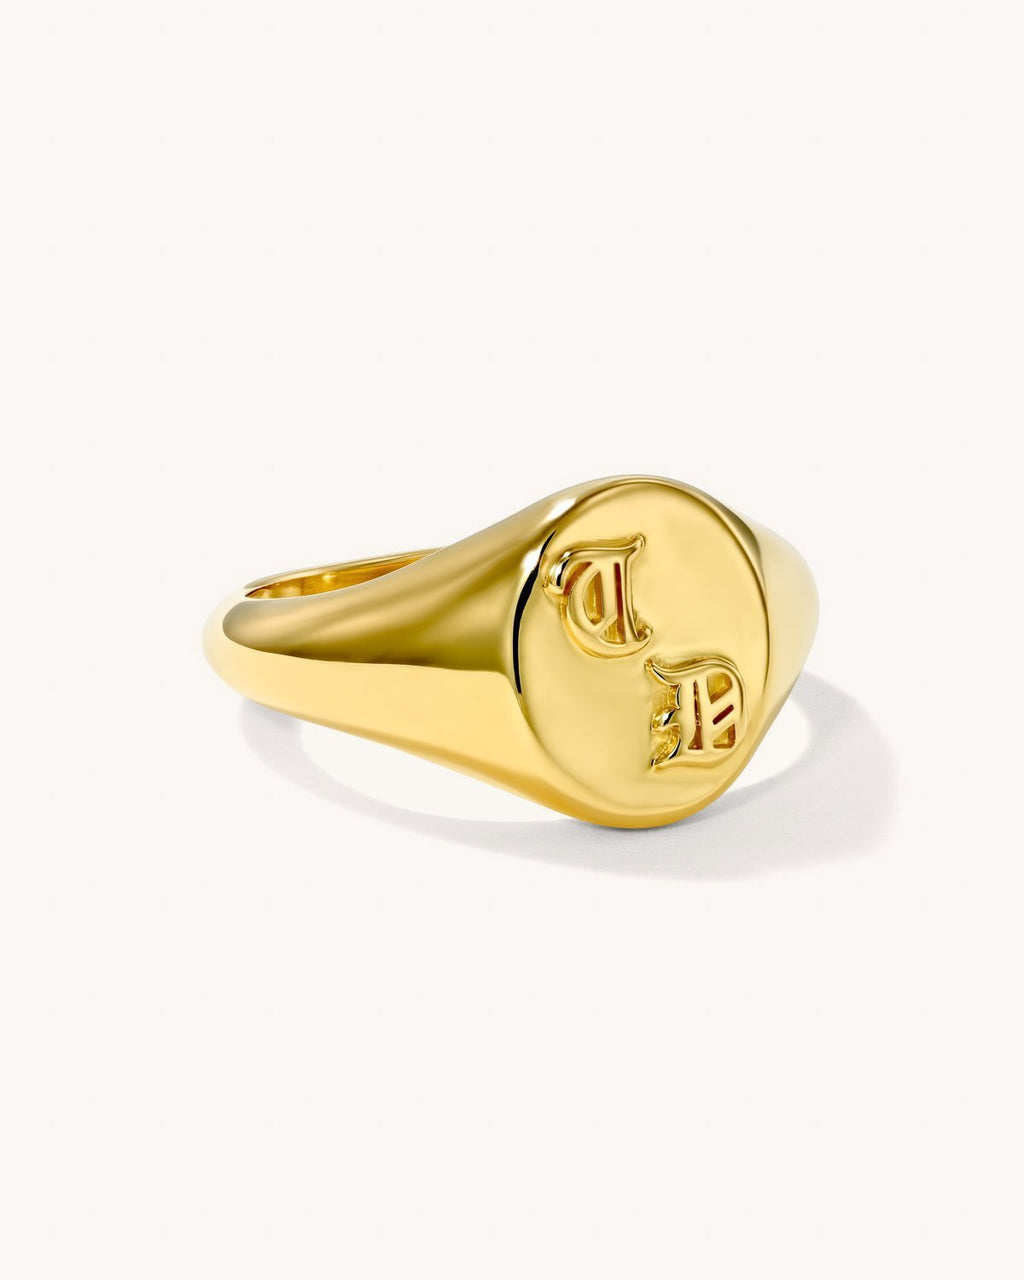 Stainless Steel Letter D Initial Royal Monogram Engraved Engraved Square  Flat Top Biker Style Polished Signet Ring - Walmart.com